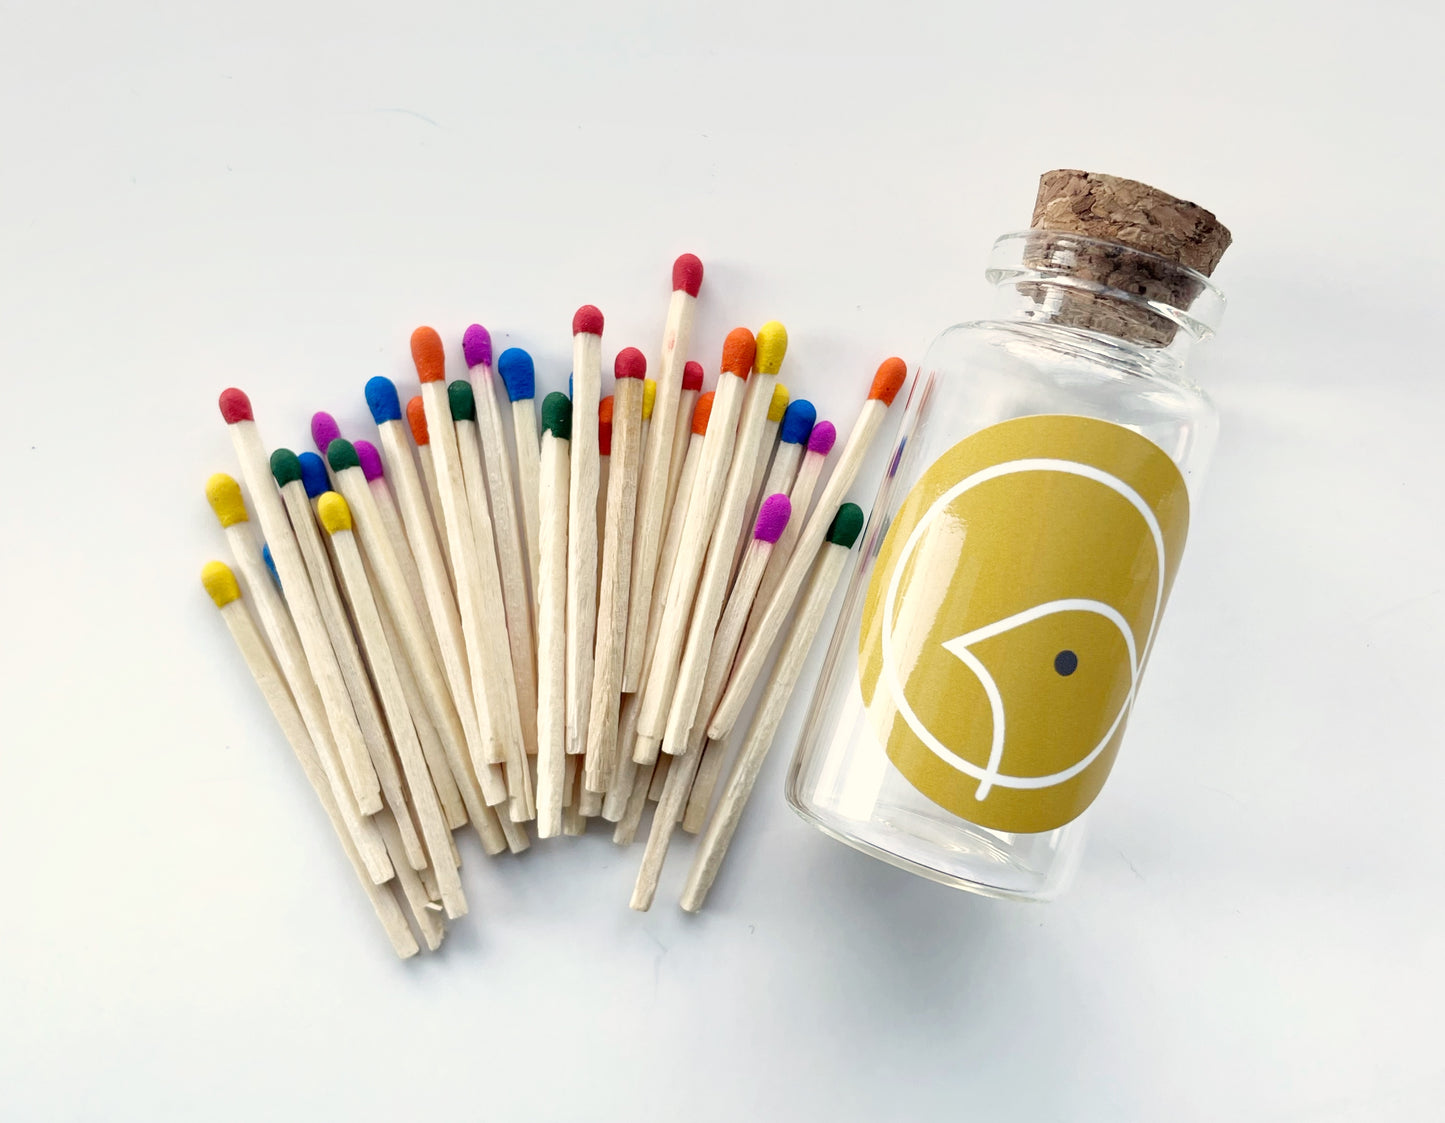 One small glass jar with 30 rainbow colour tipped safety matches laid out beside it. The jar has a cork stopper and a yellow label on it.